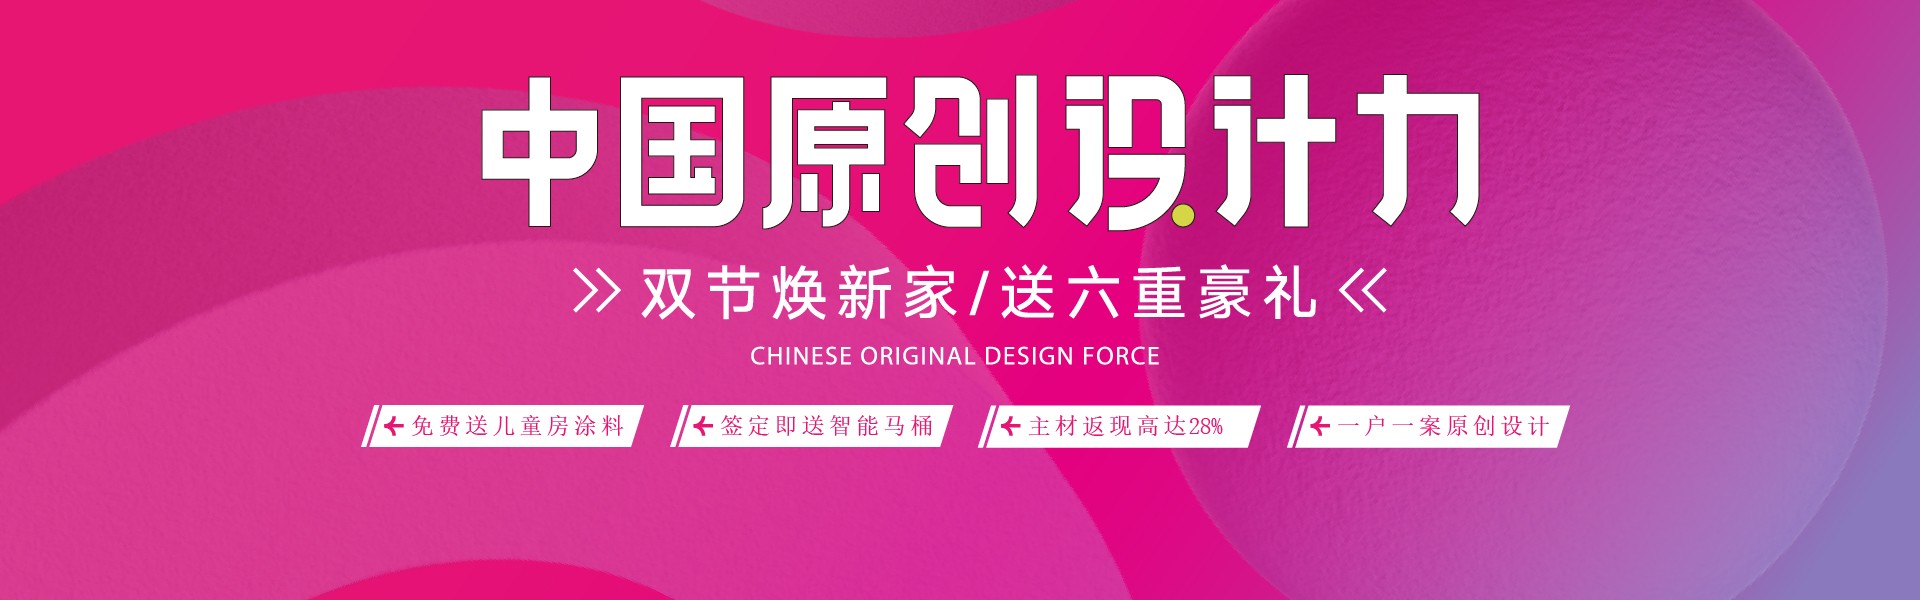 pc-首页banner